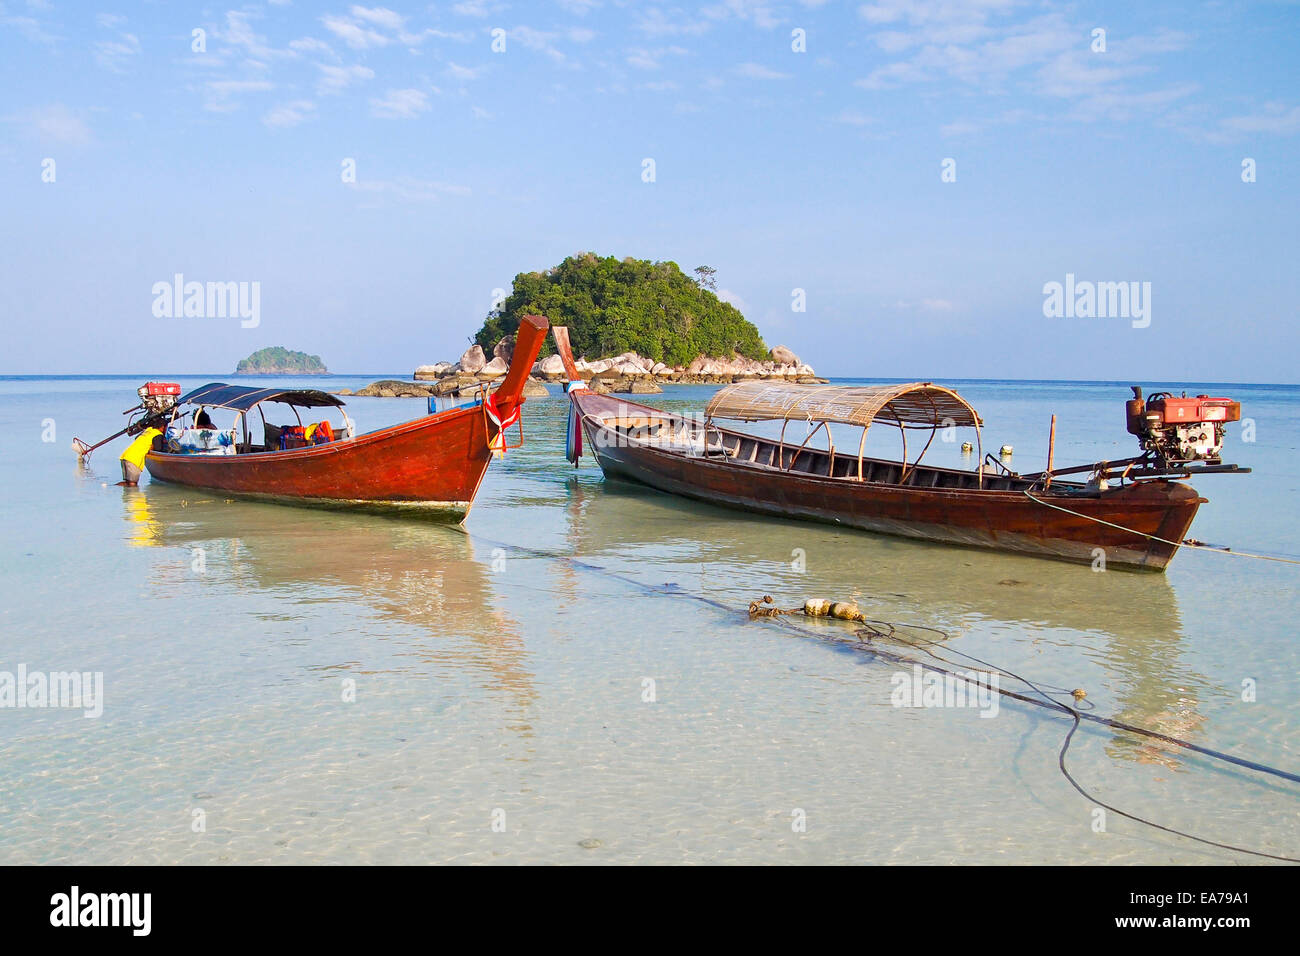 Traditional Thai longtail boat at the beach Stock Photo